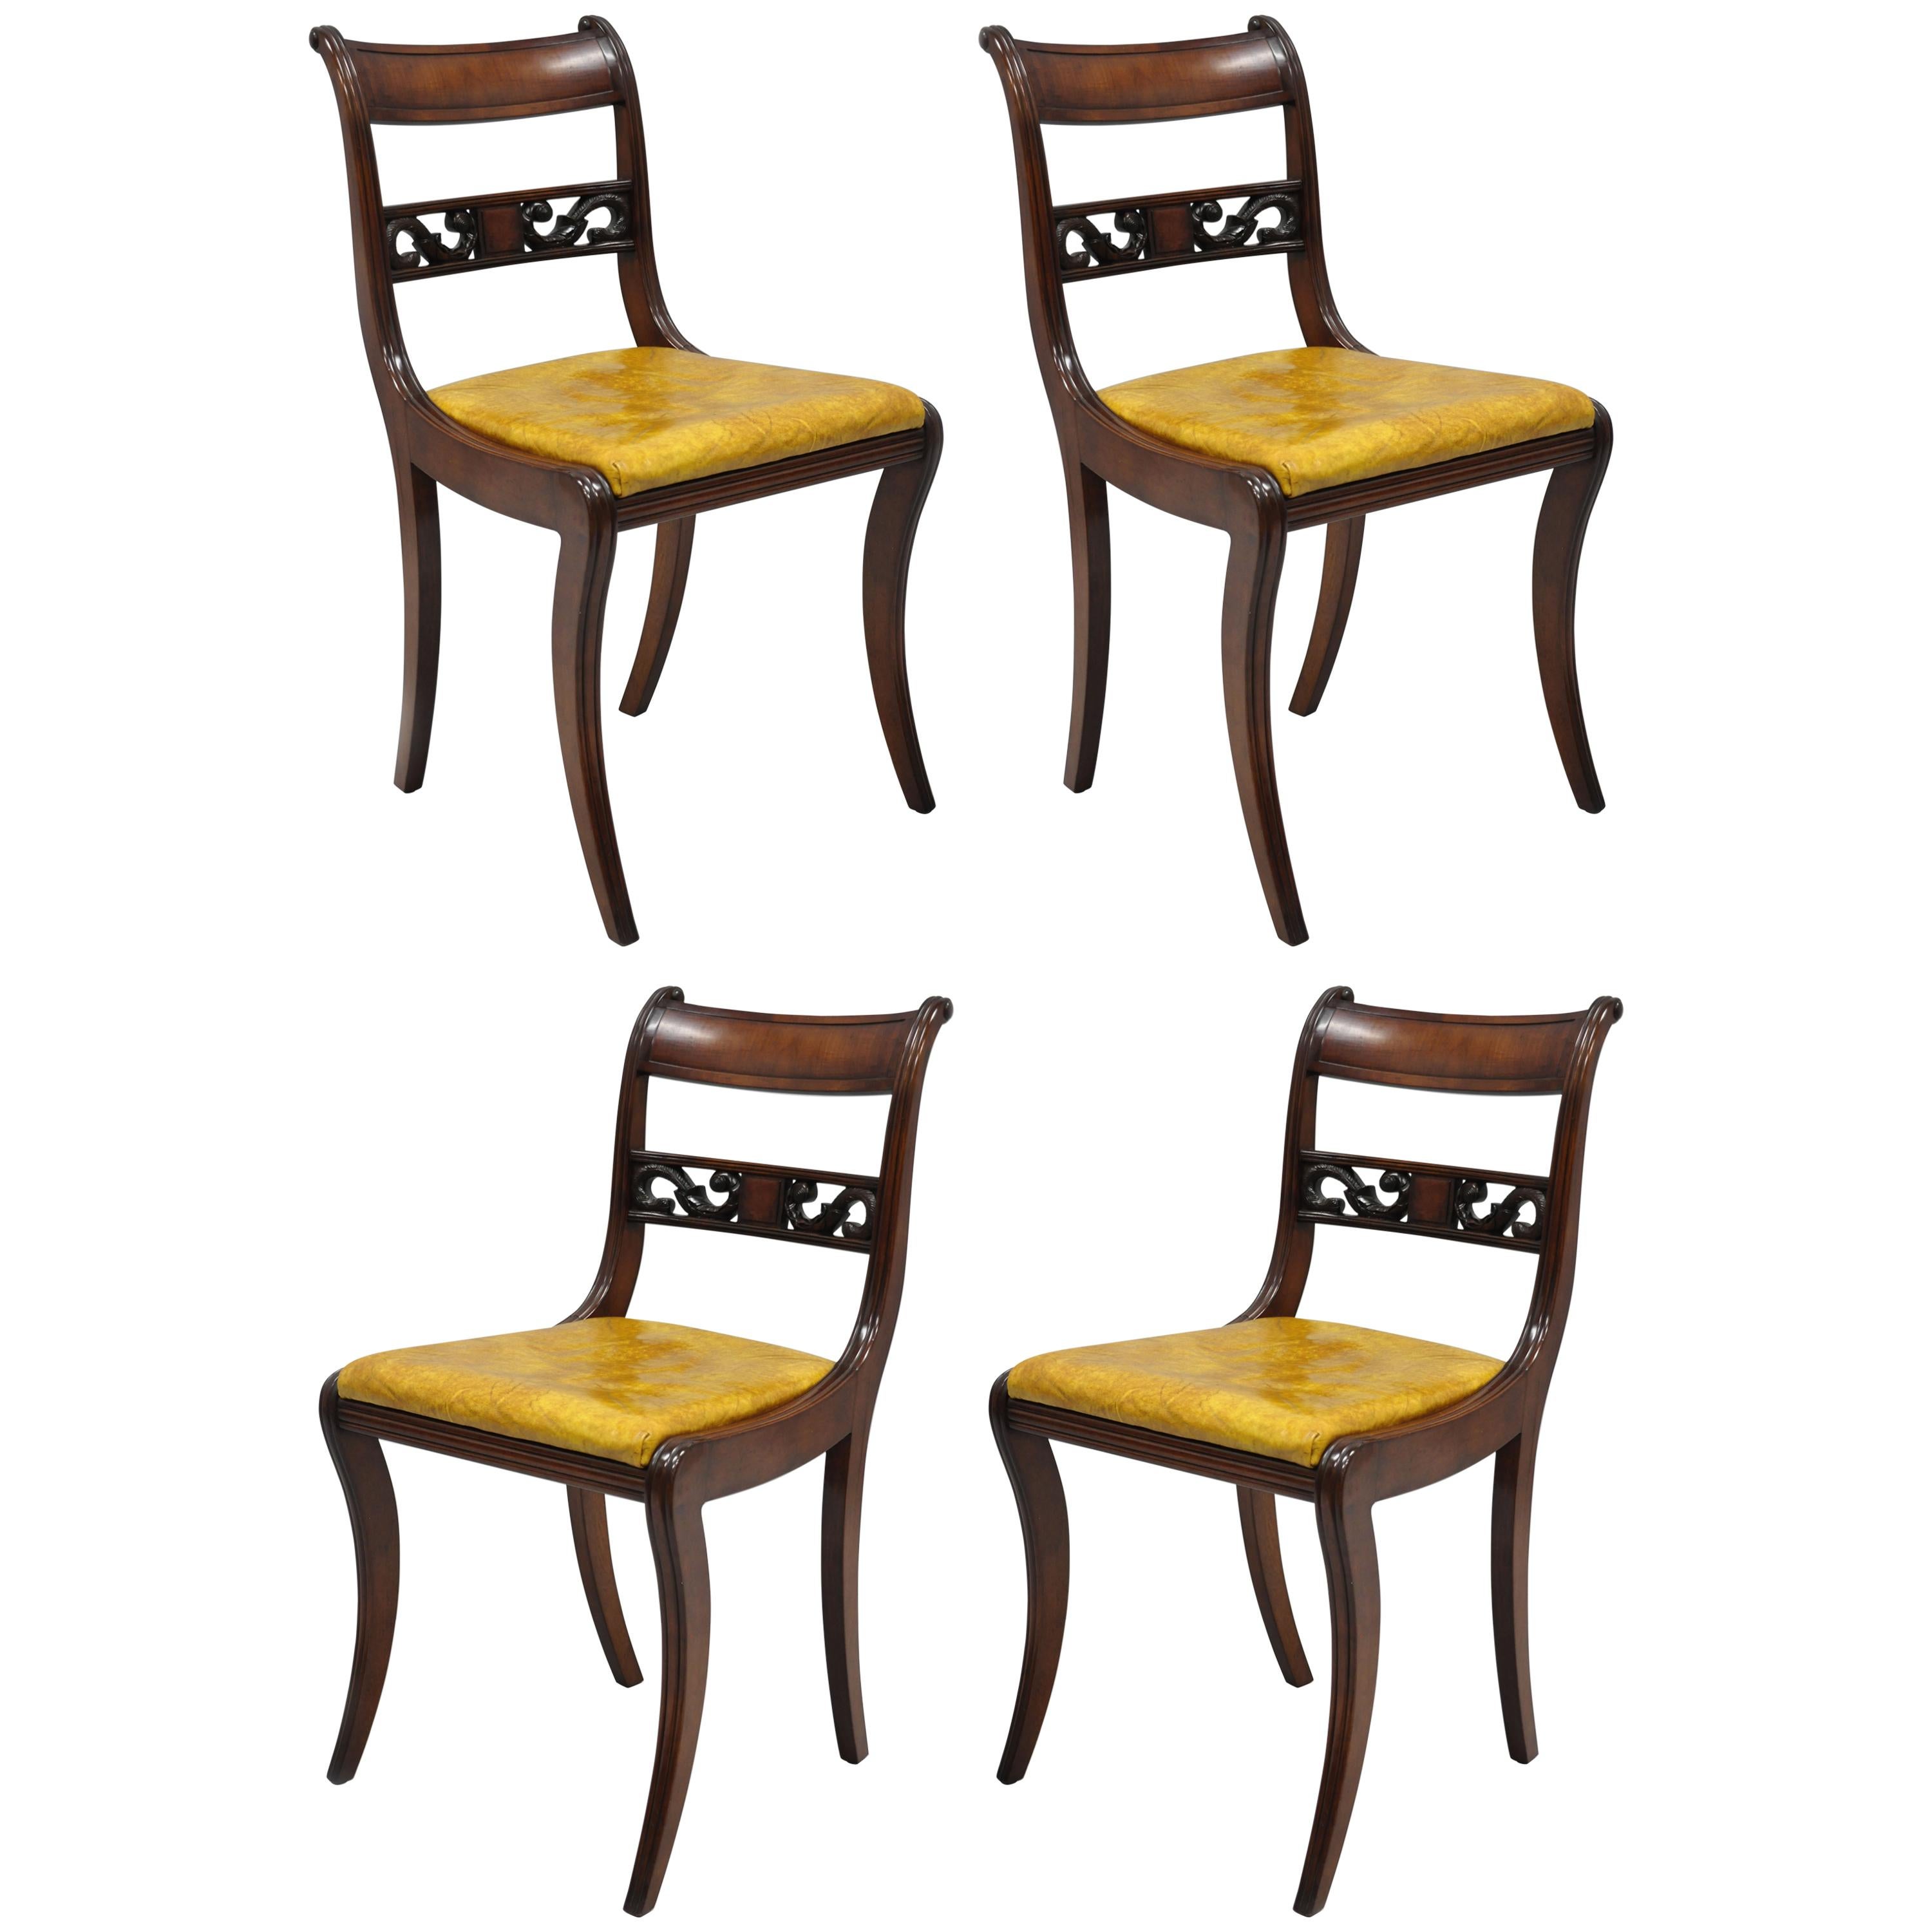 Four Mahogany Carved Plume & Acanthus Regency Style Saber Leg Dining Side Chairs